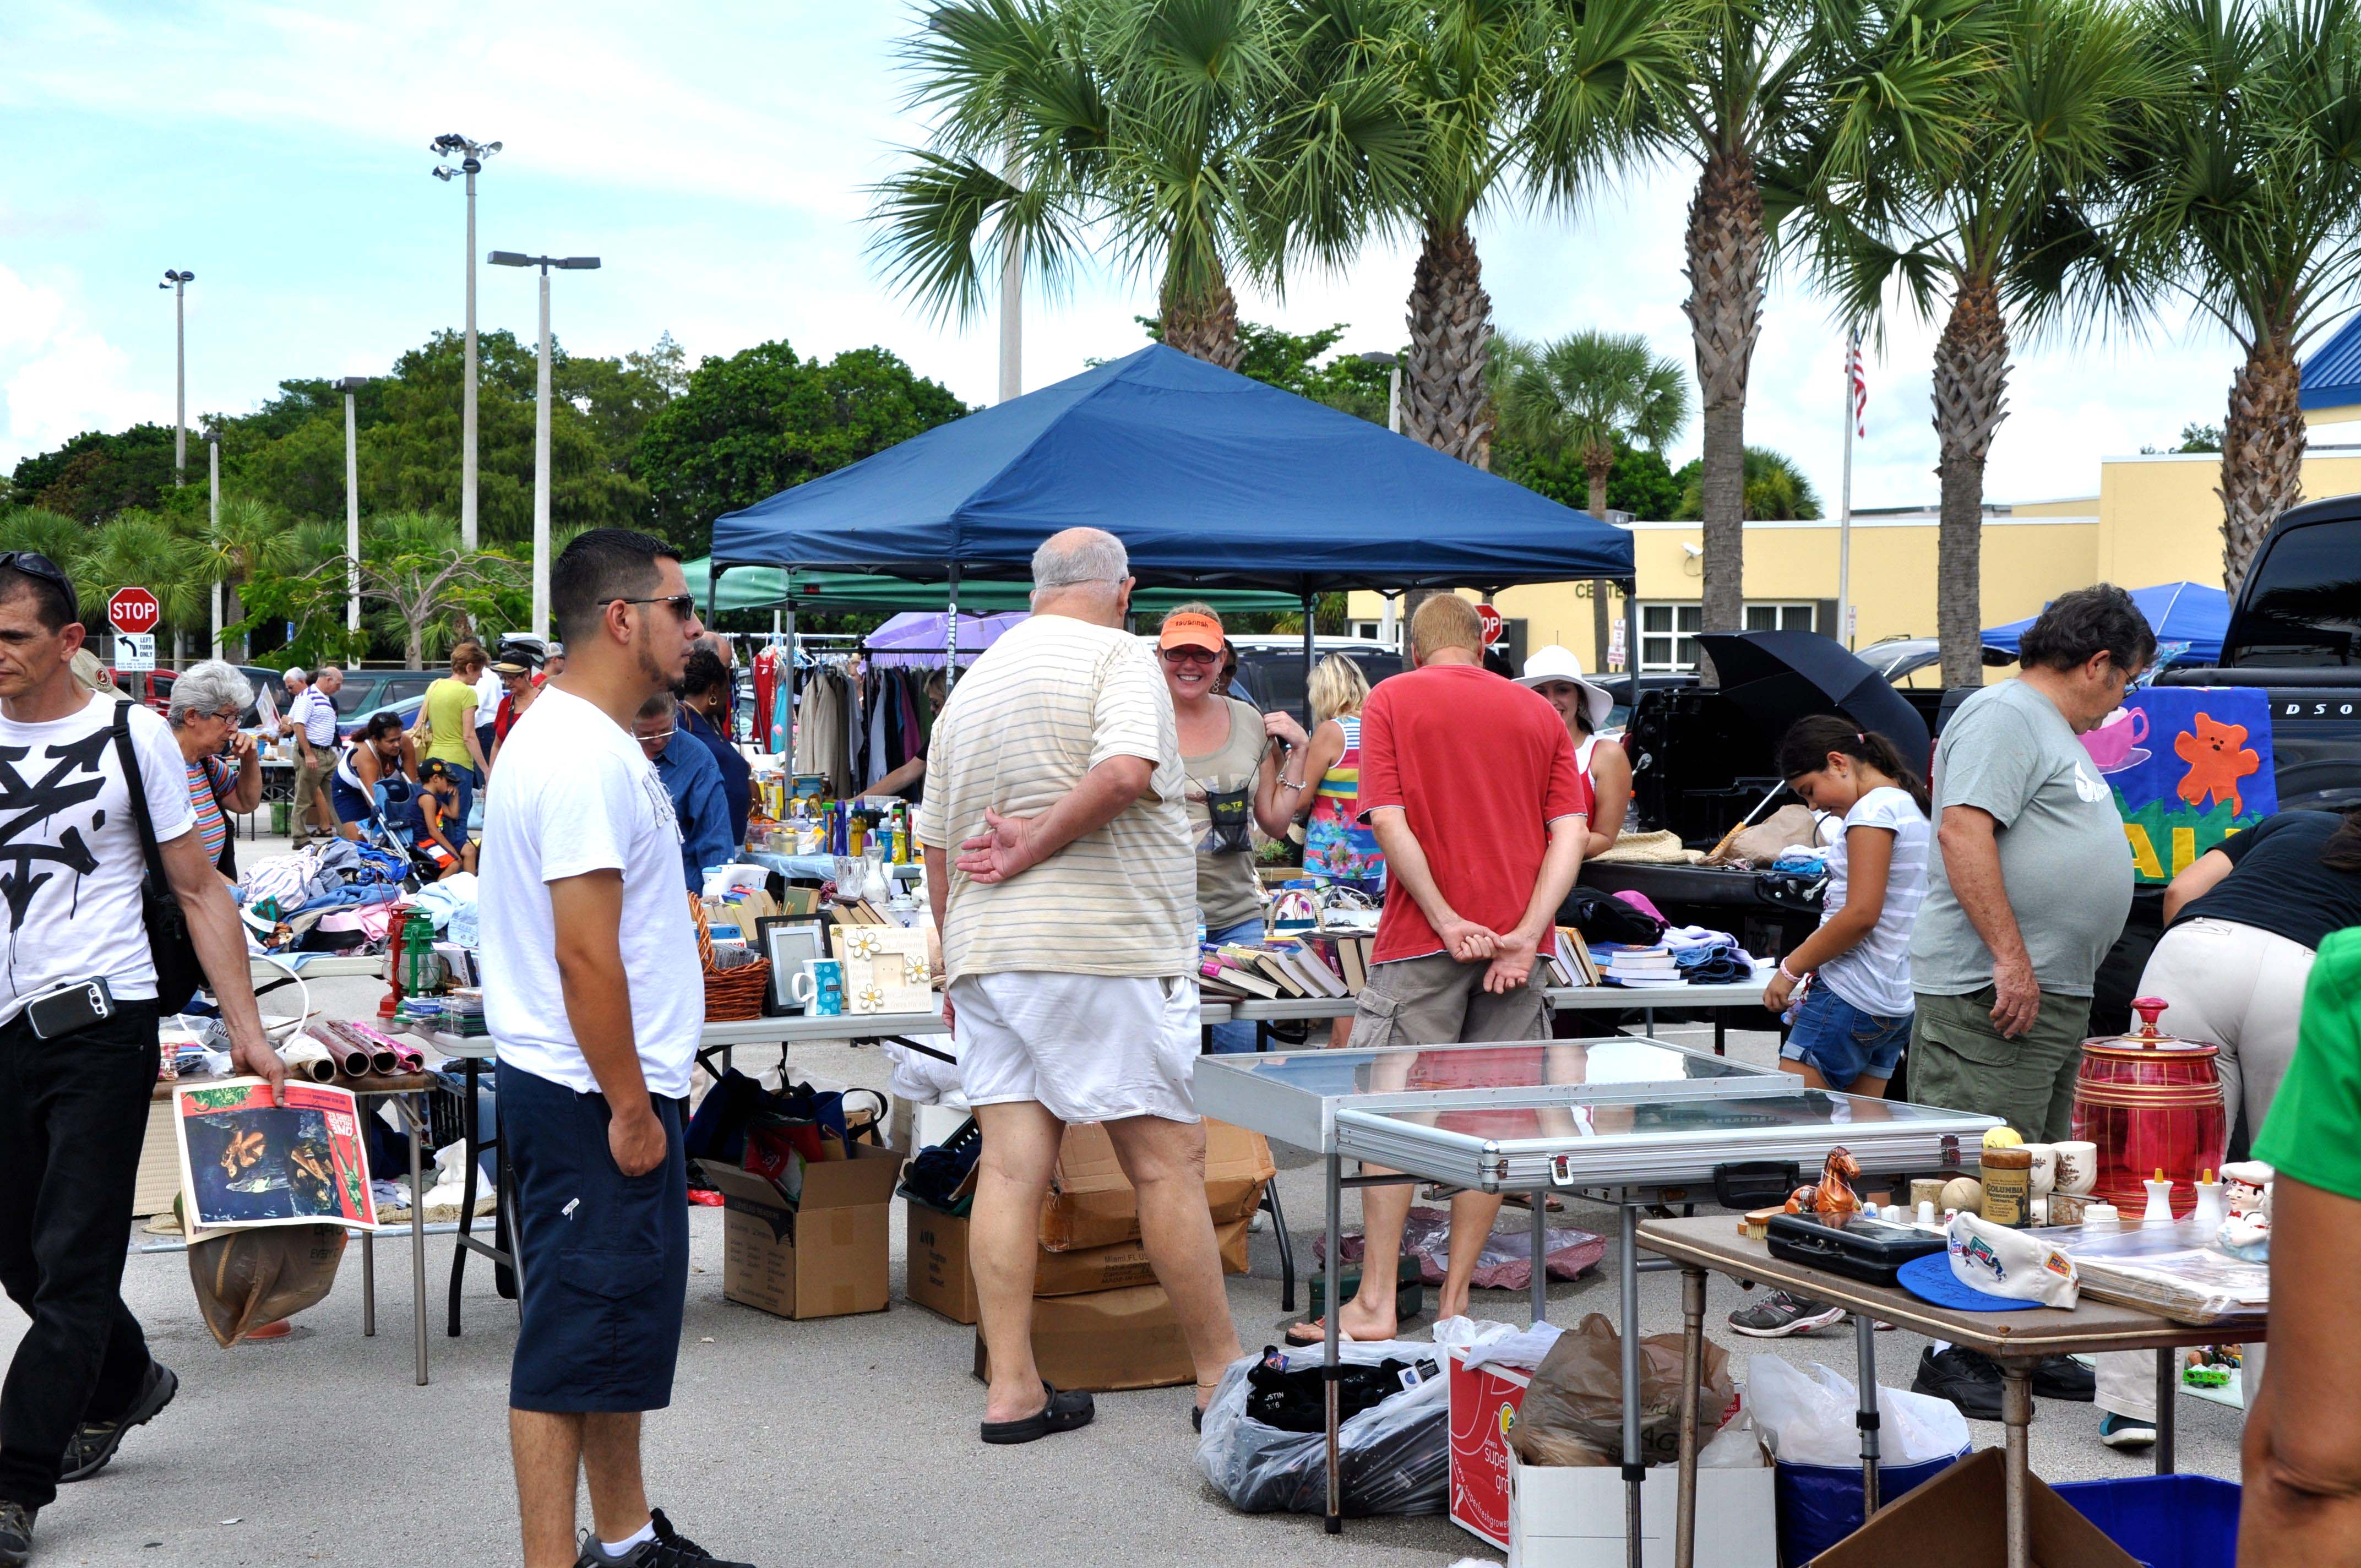 Don't forget: in Tamarac the early bird gets the good stuff.